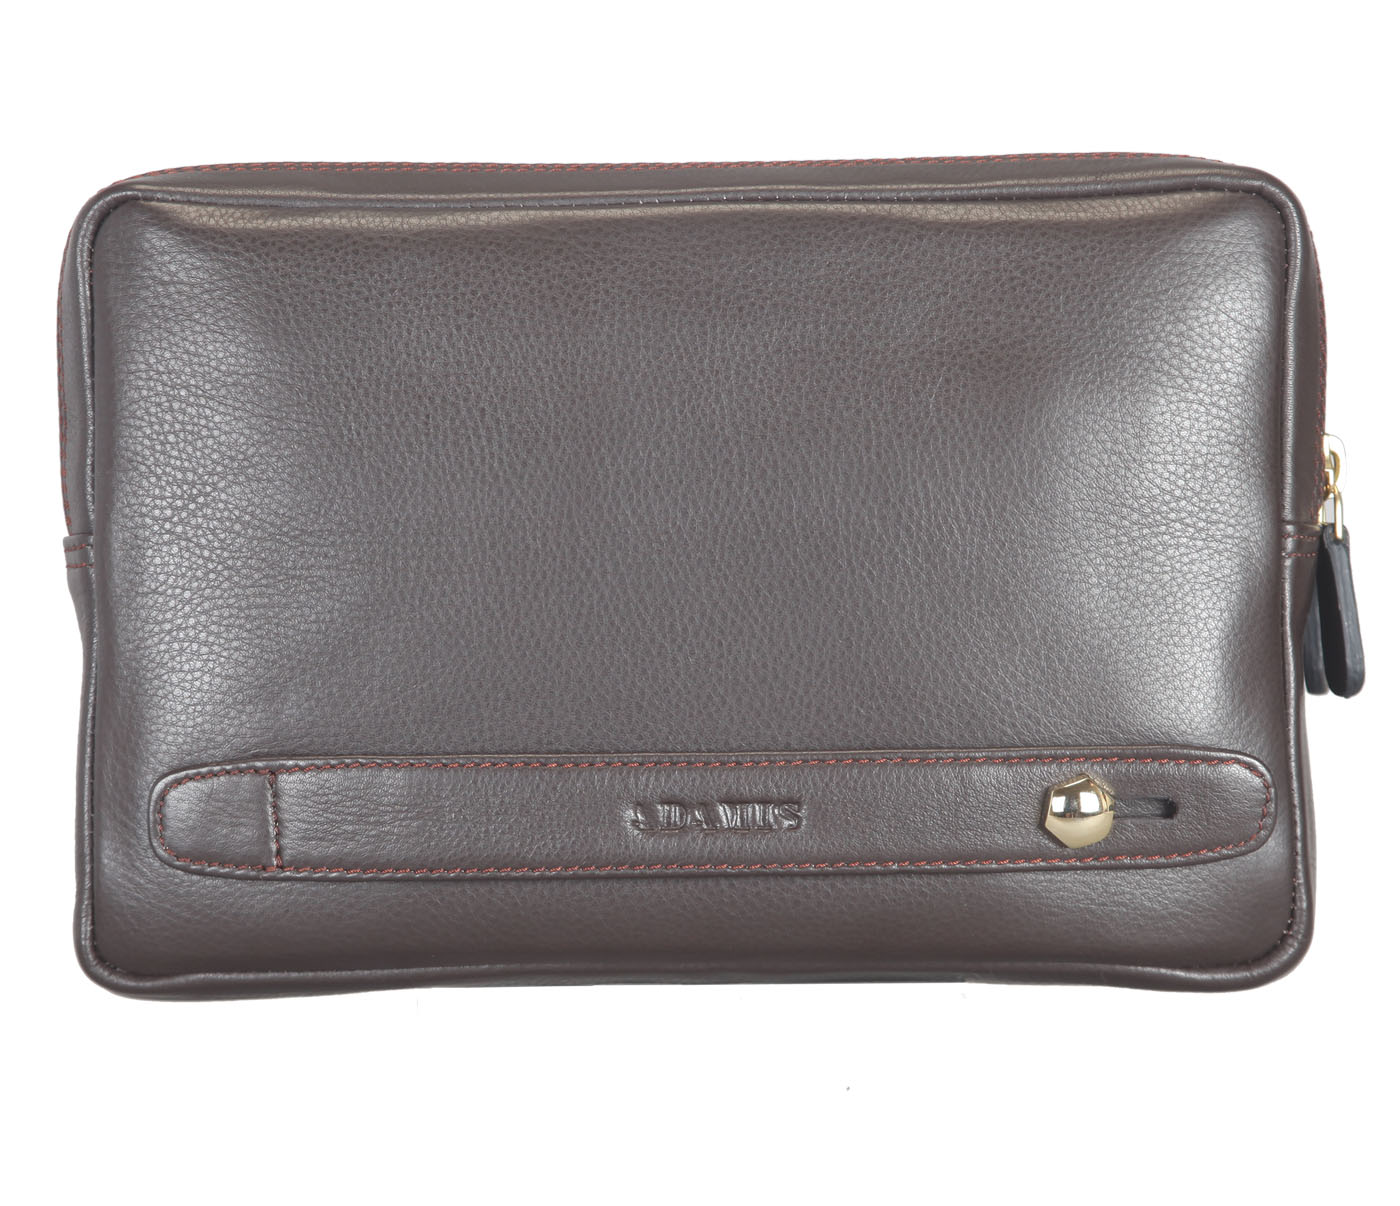 P32-Jesse-Men's bag cum travel pouch in Genuine Leather - Brown.